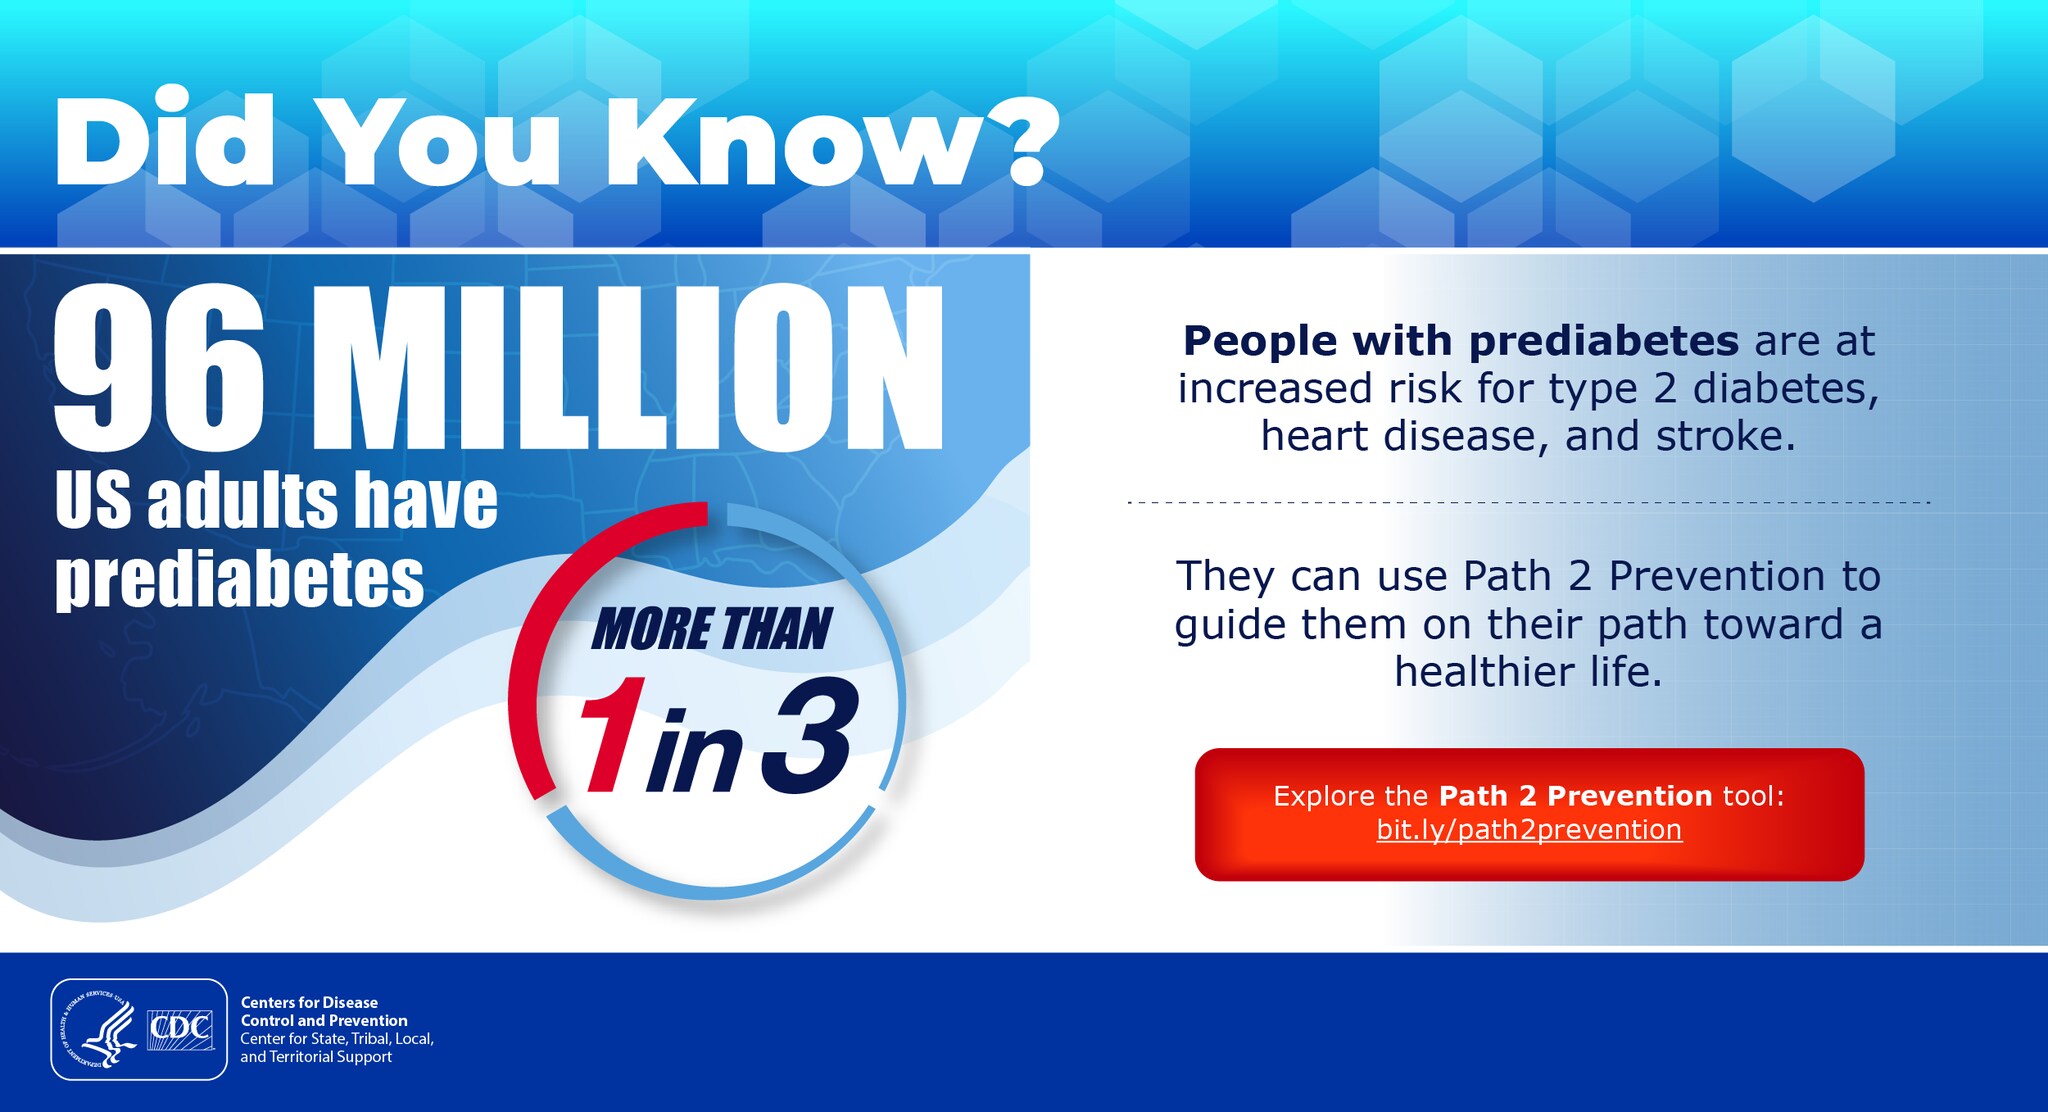 An infographic titled Did You Know? Text says “96 million US adults have prediabetes -- that’s more than 1 in 3. People with prediabetes are at increased risk for type 2 diabetes, heart disease, and stroke. People at risk for type 2 diabetes can use Path 2 Prevention to guide them on their path toward a healthier life. Explore the Path 2 Prevention tool: bit.ly/path2prevention"